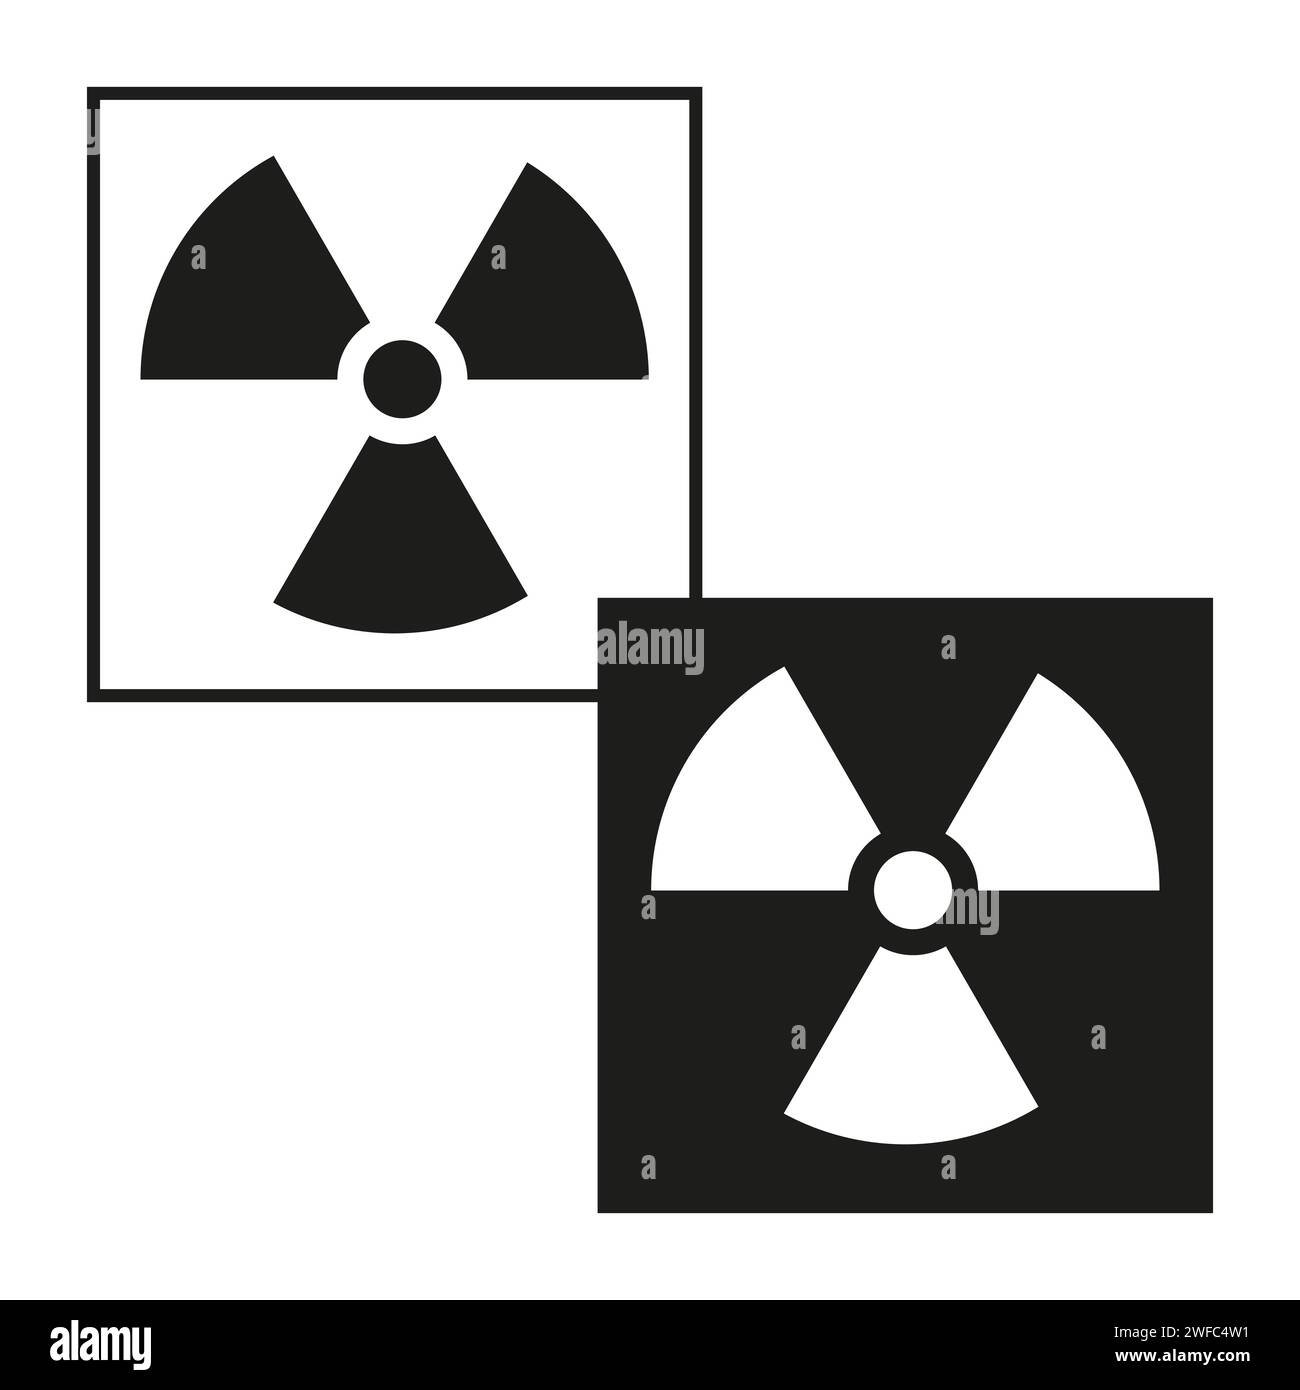 radiation icons. Vector illustration. Stock image. EPS 10. Stock Vector